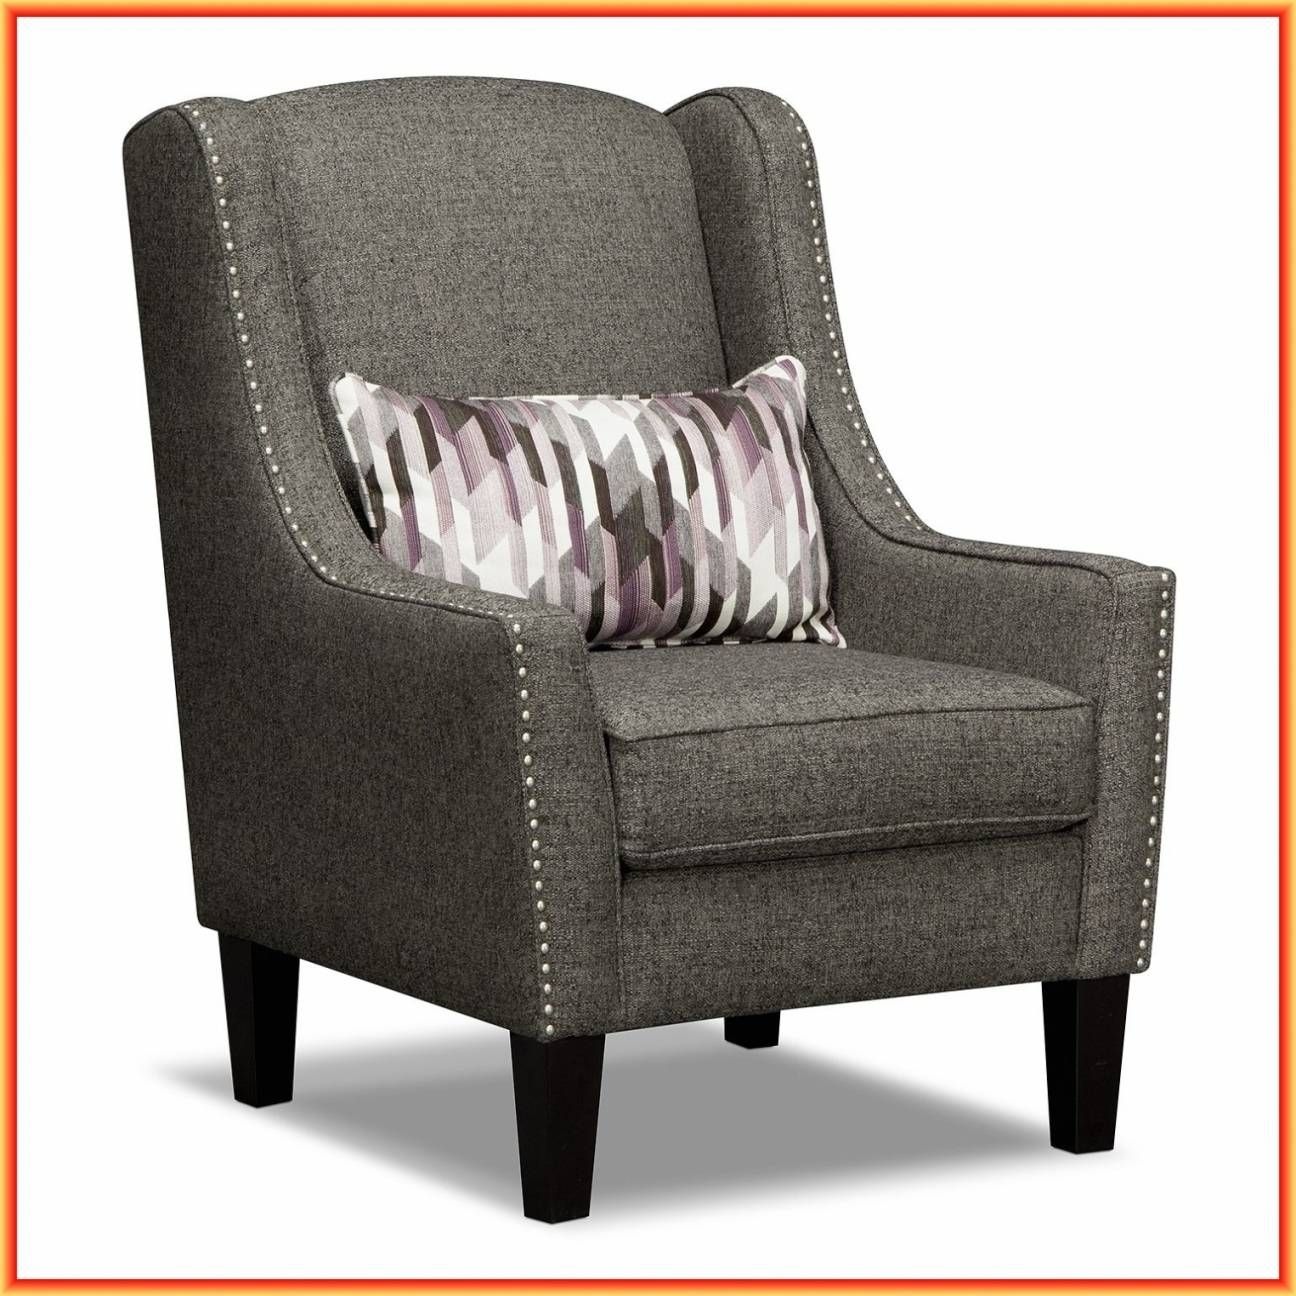 Elegant Armchairs For Small Spaces – Merciarescue In Small Armchairs Small Spaces (View 4 of 30)